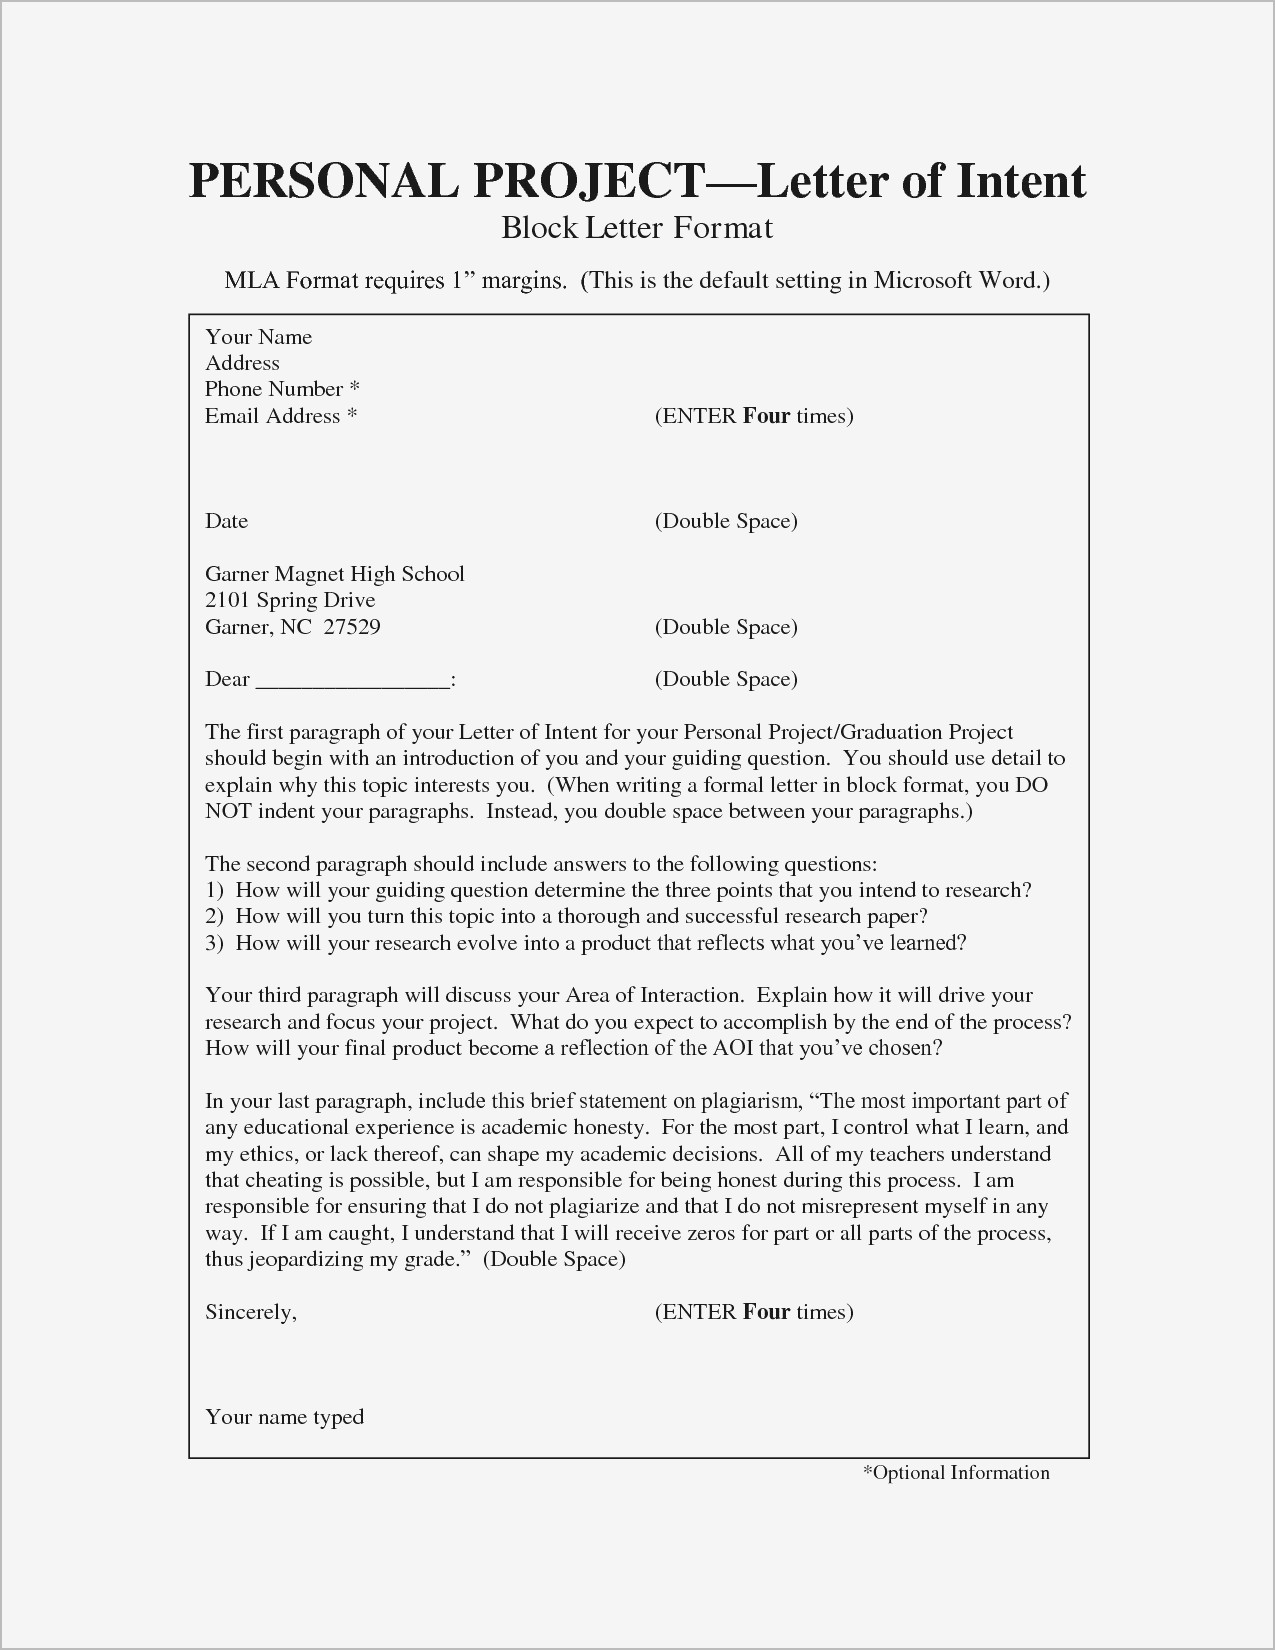 Legal Letter Of Intent Template - Inspirational Letter Templates